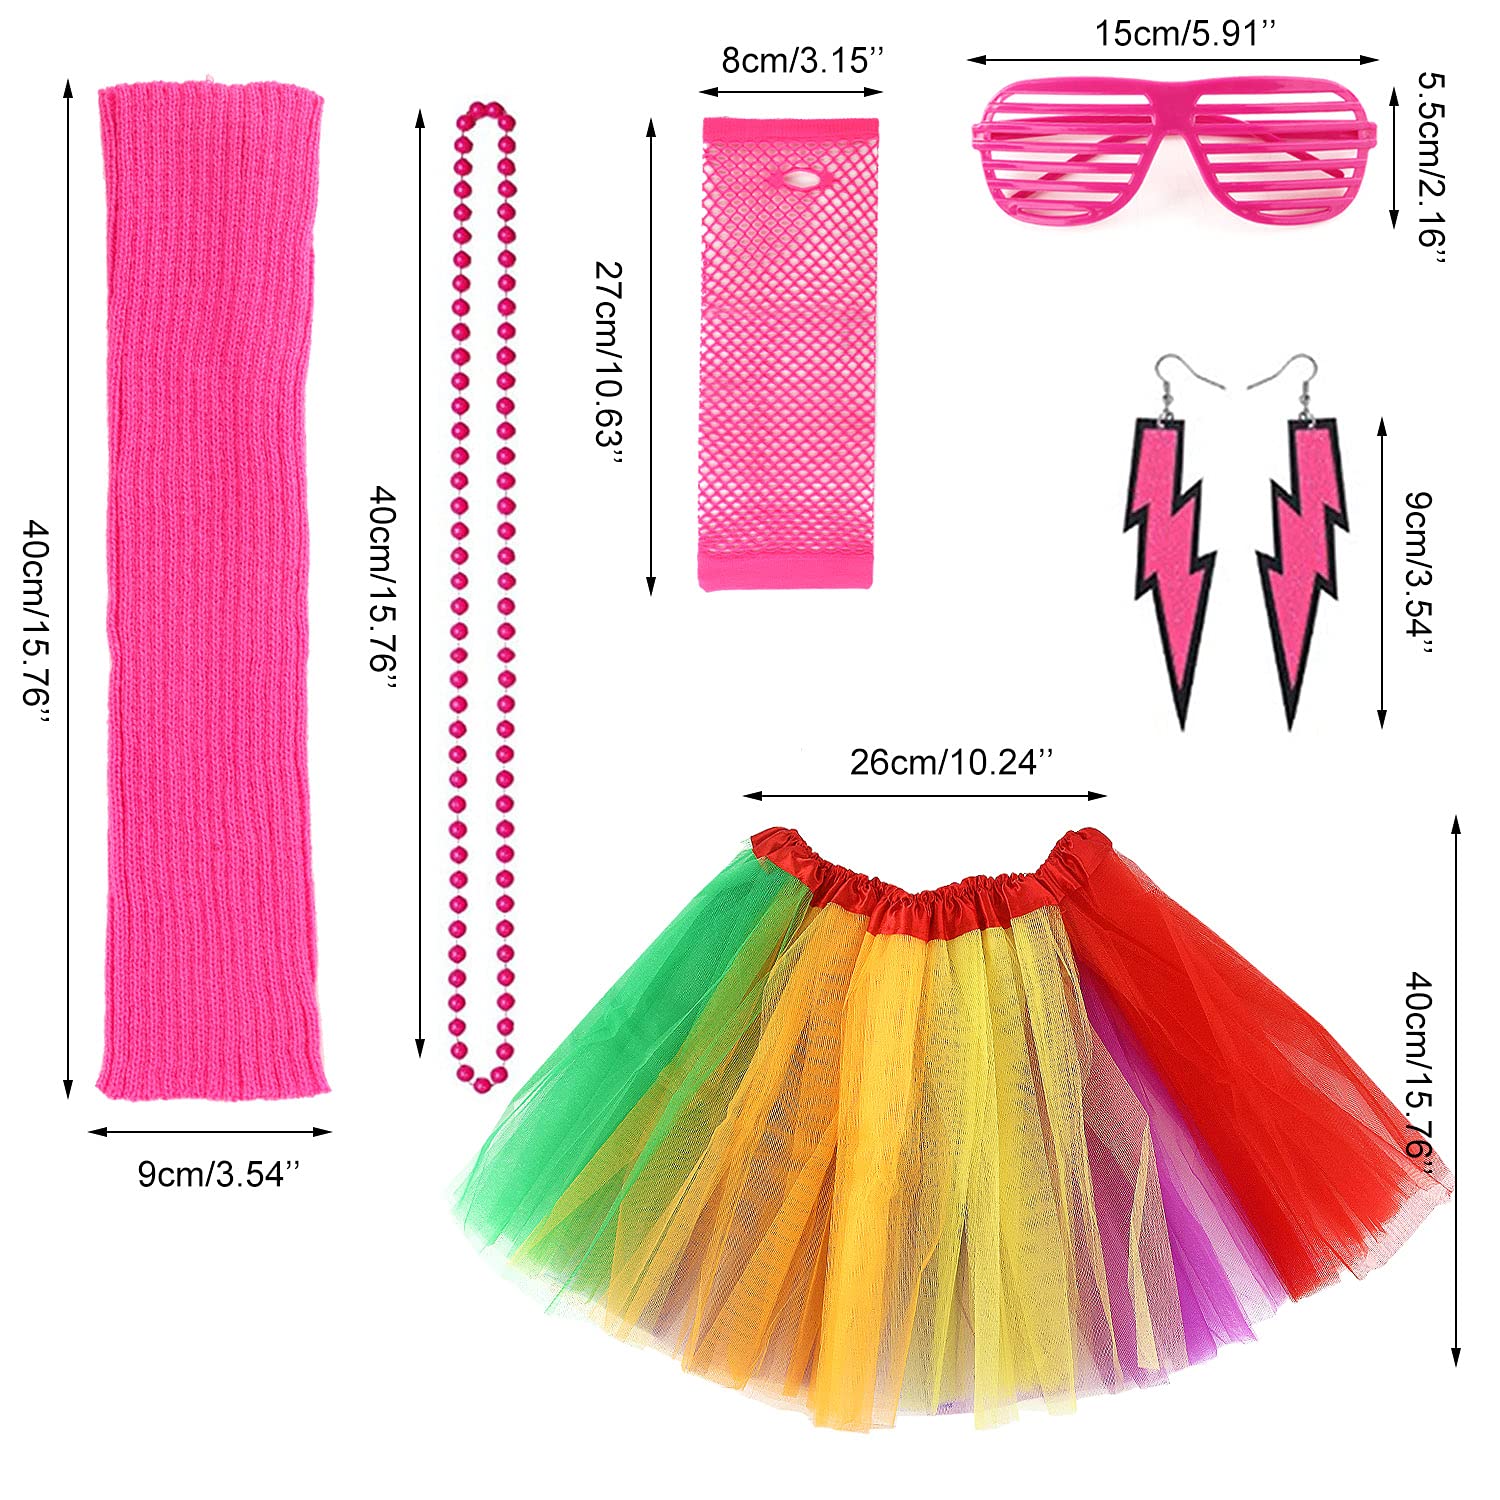 70s 80s Fancy Dress Costumes Accessories Set ,6 in 1 Adult Fancy Tutu Skirt  Set for Cosplay Party Theme Party